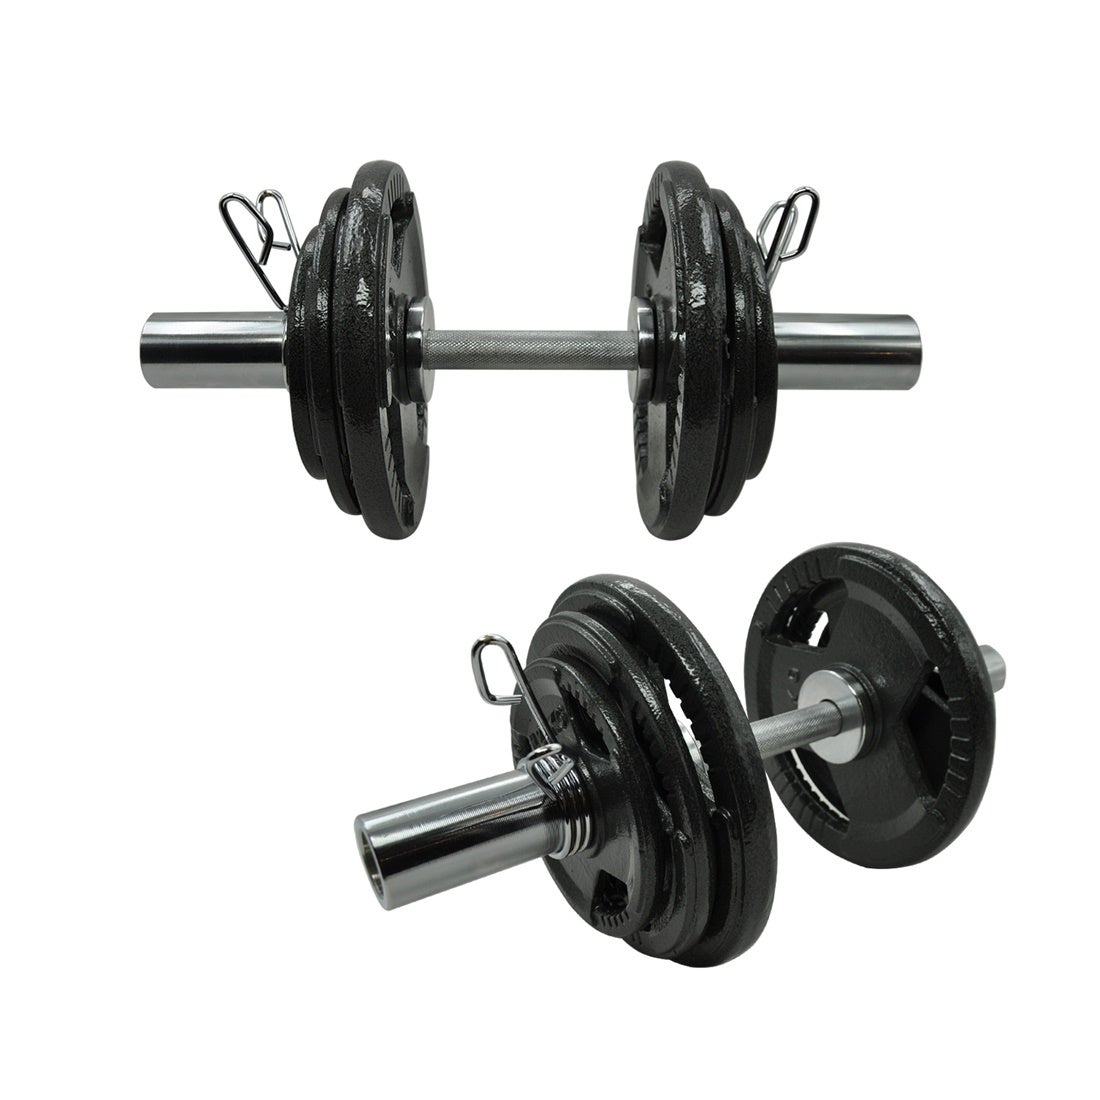 28kg - 78kg 50cm Olympic Dumbell Bar Weight Set - Cast Iron Triple Handle Grip Plate